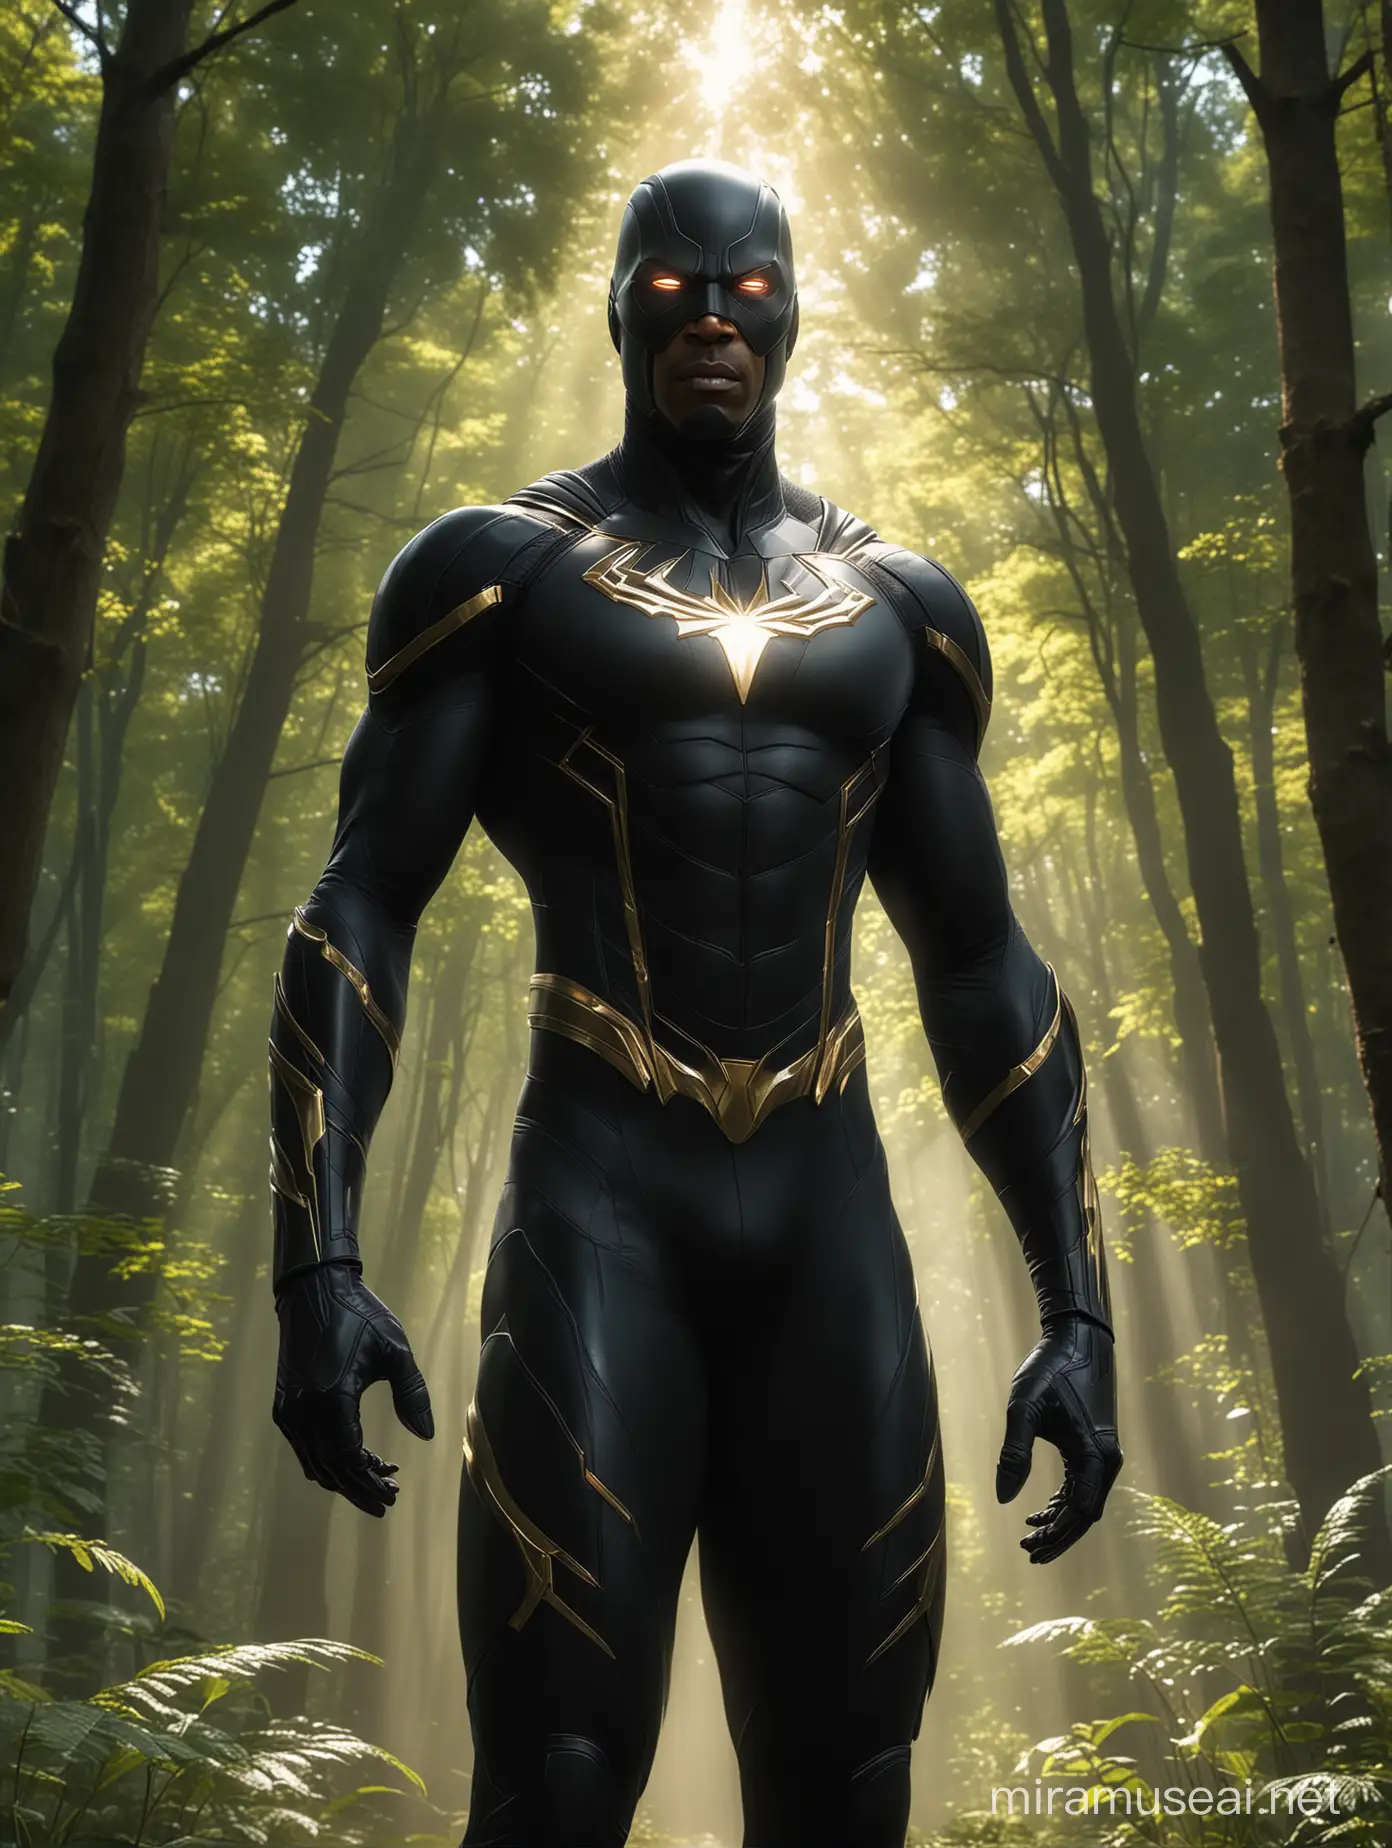 As Vision emerges from the dense woods, his sleek black superhero suit gleams in the dappled sunlight filtering through the trees. With every step, he exudes an aura of power and purpose, a silent guardian amidst nature's embrace, looking realistic with cinematic backgrounds and a slight light on the face to look attractive, detailed eyes and detailed face
